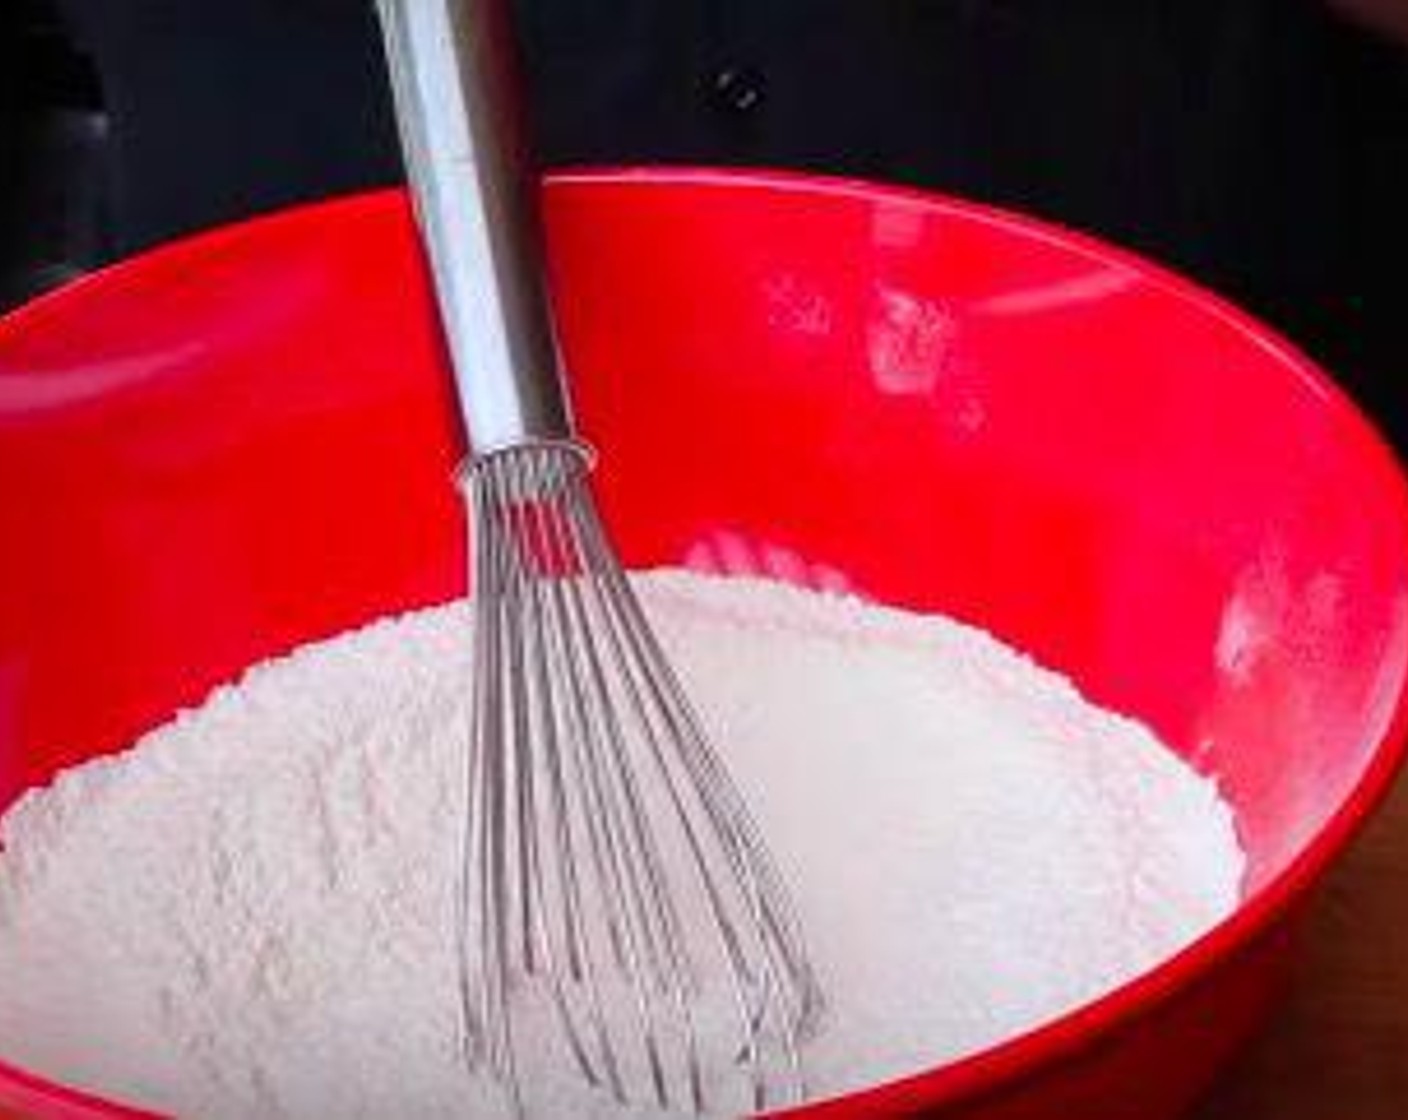 step 4 In a large mixing bowl combine the All-Purpose Flour (1 1/2 cups), Granulated Sugar (1 cup), Baking Powder (1 Tbsp), and Salt (1/2 tsp).